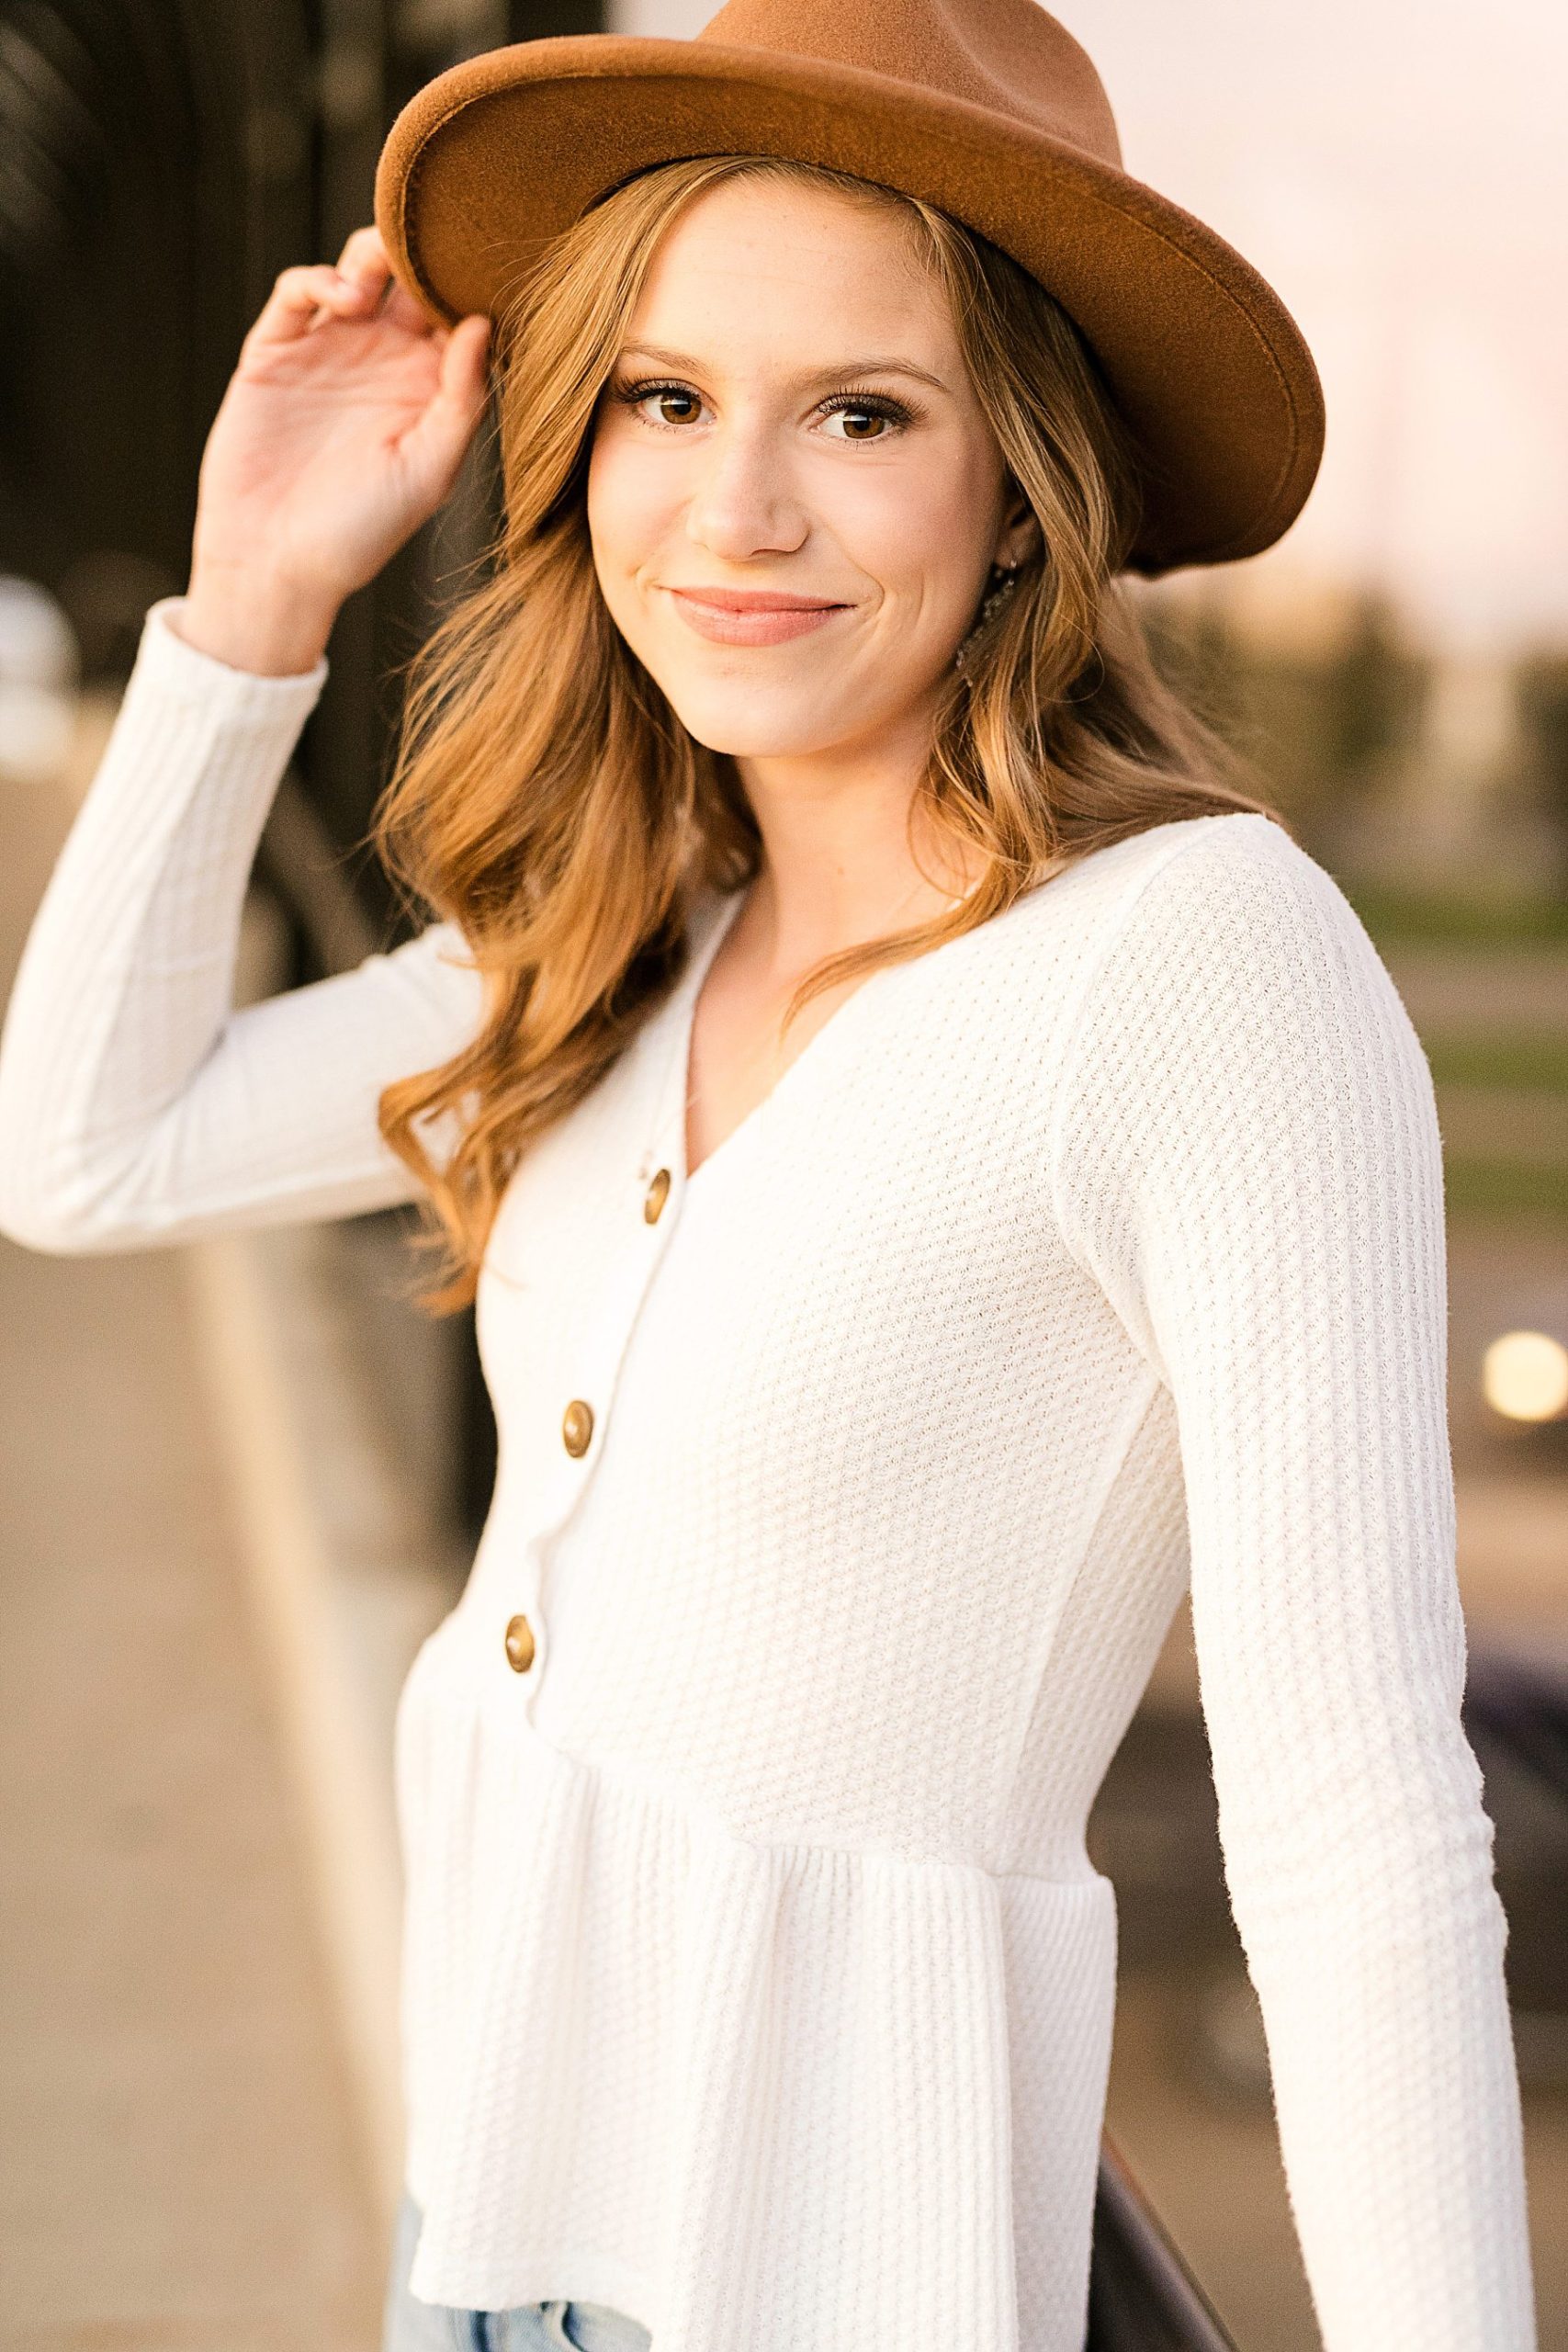 Senior girl with hat on smiling at camera in Eau Claire WI for her boho senior photos.